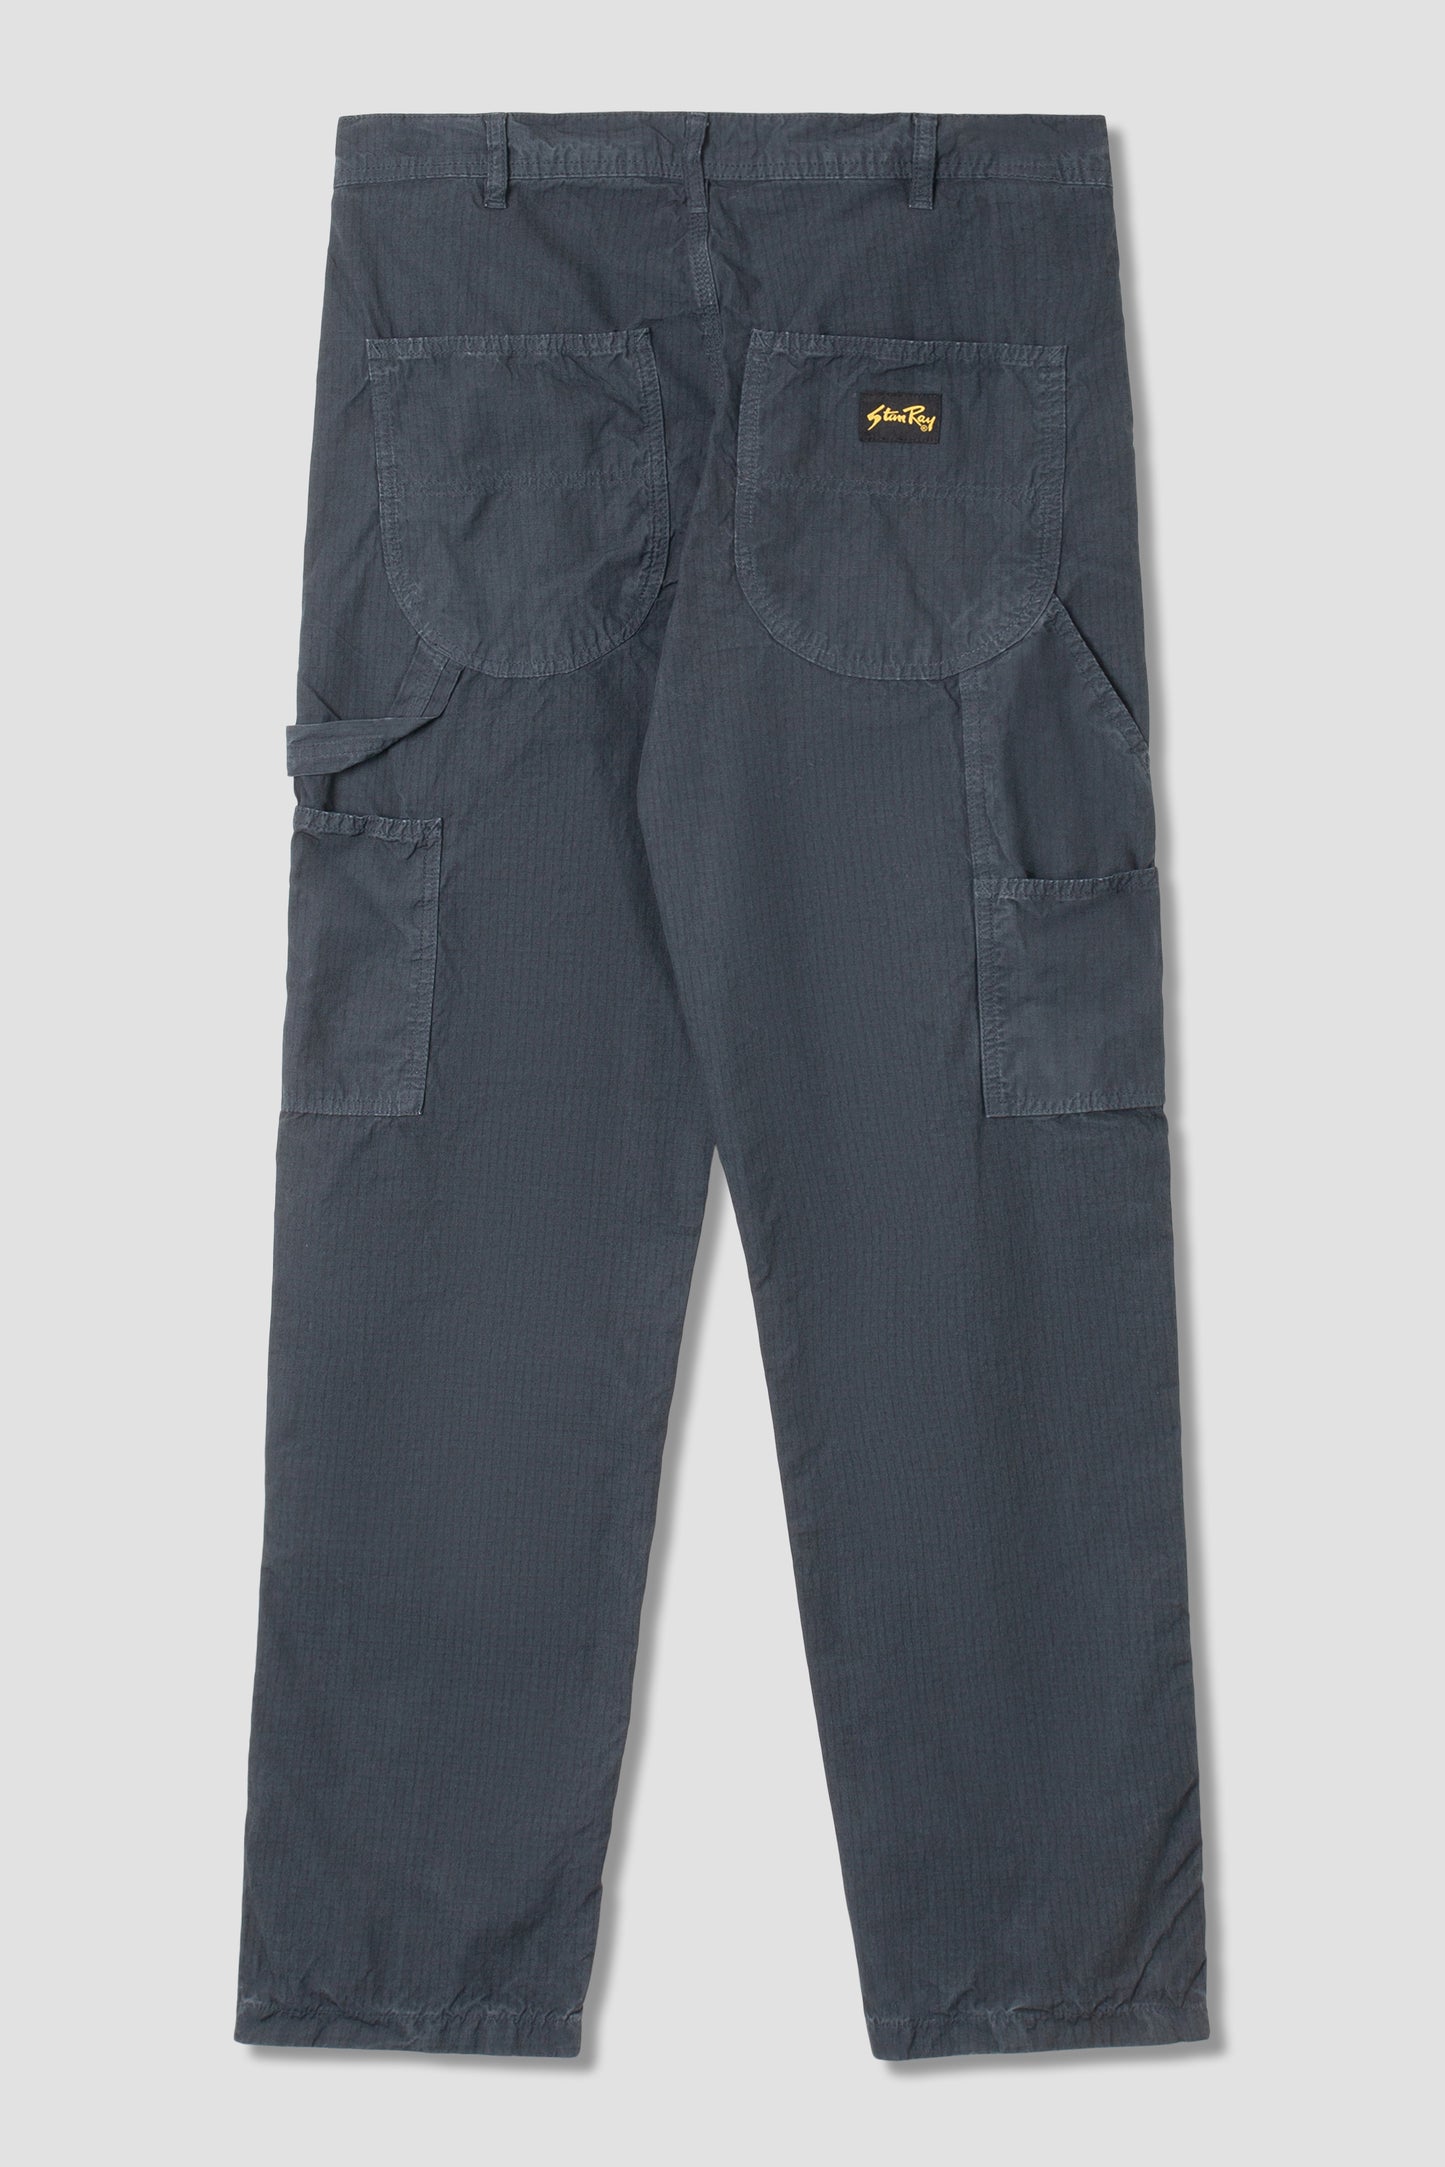 80s Painter Pant (Navy Ripstop)